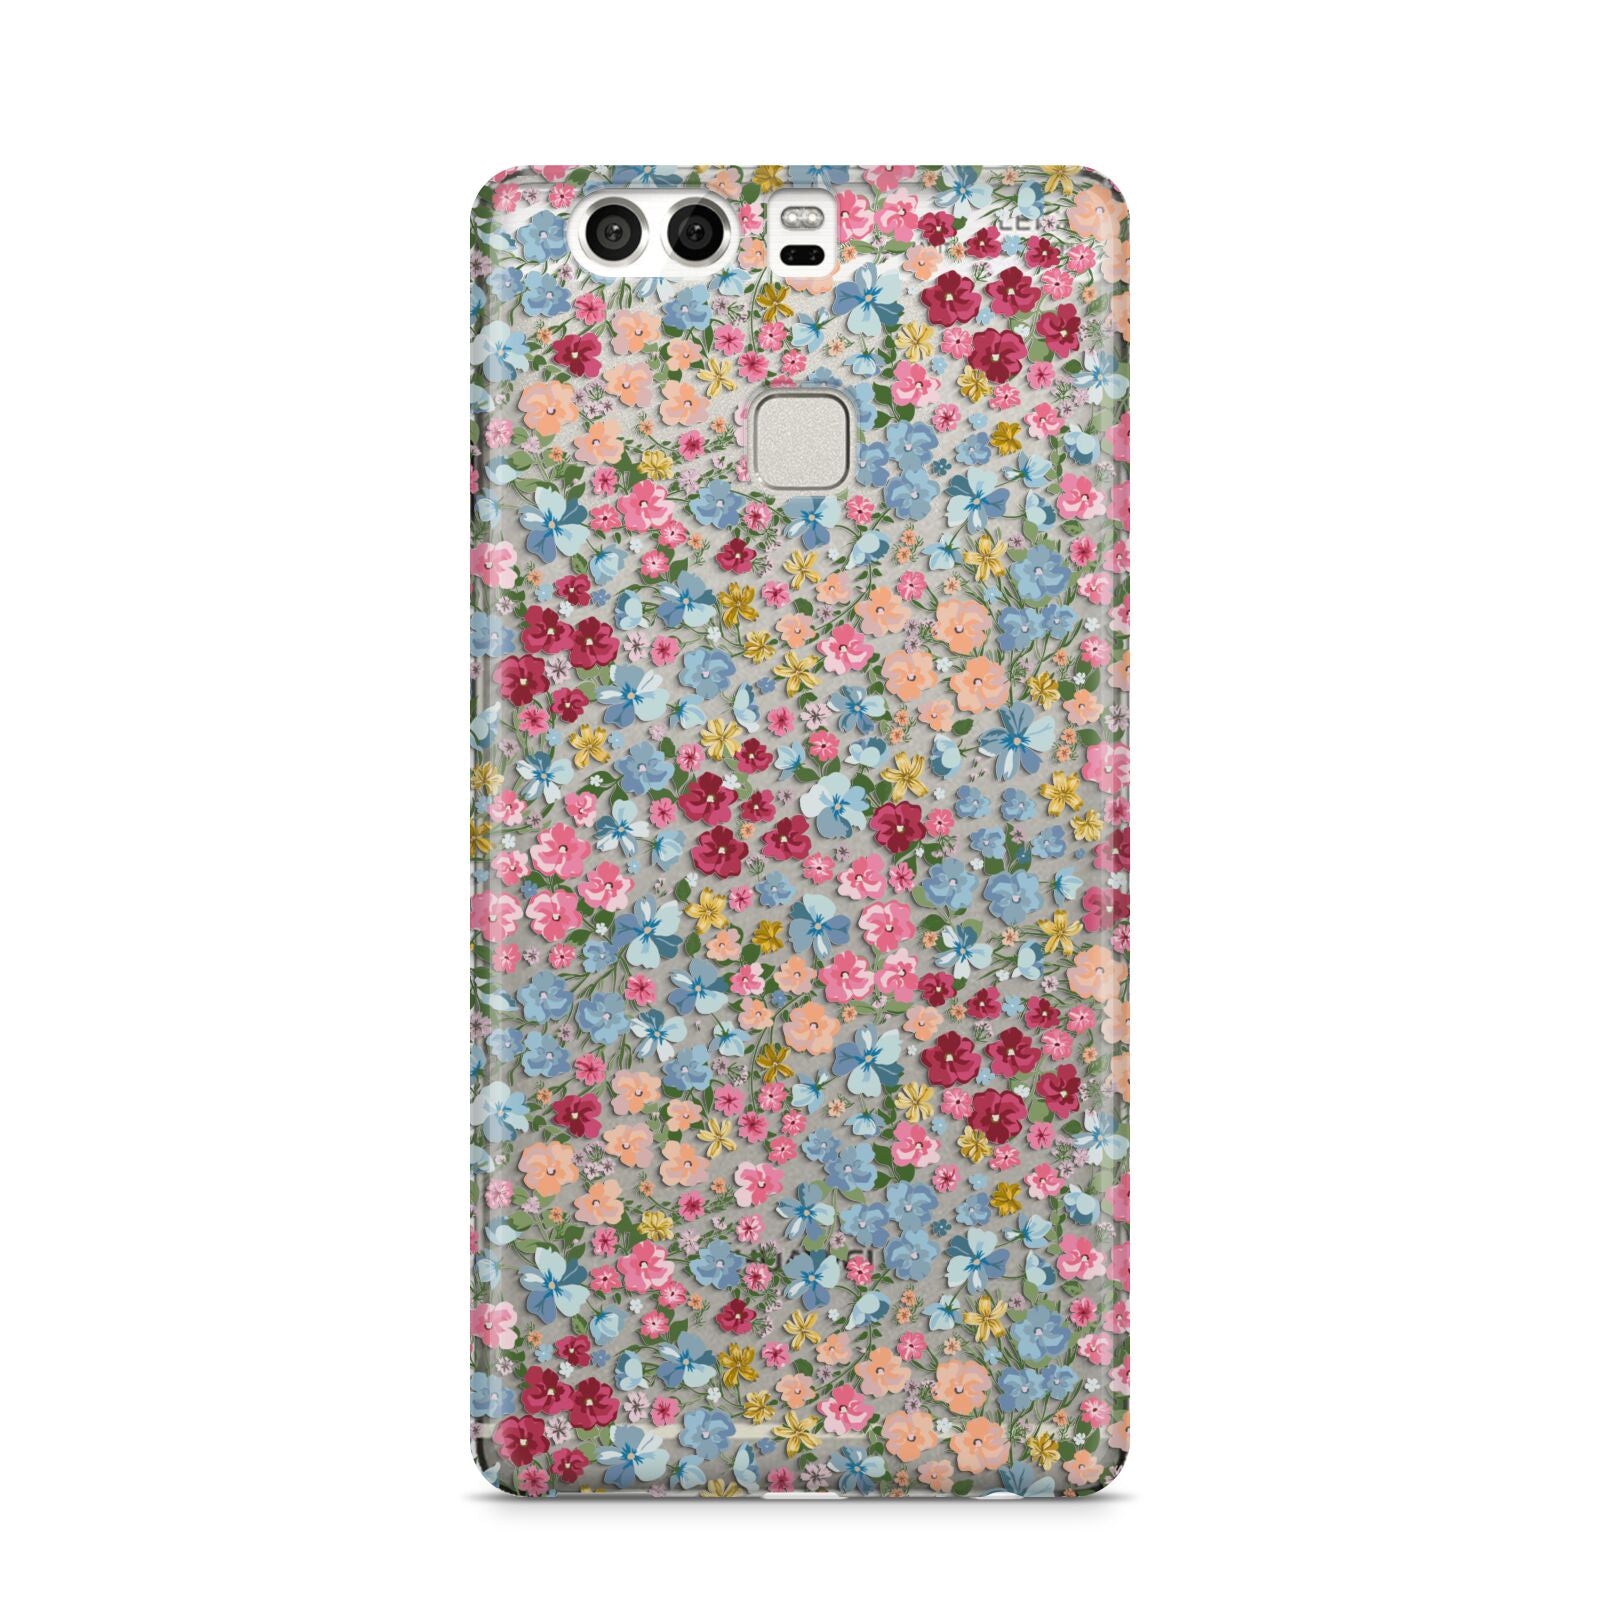 Floral Meadow Huawei P9 Case